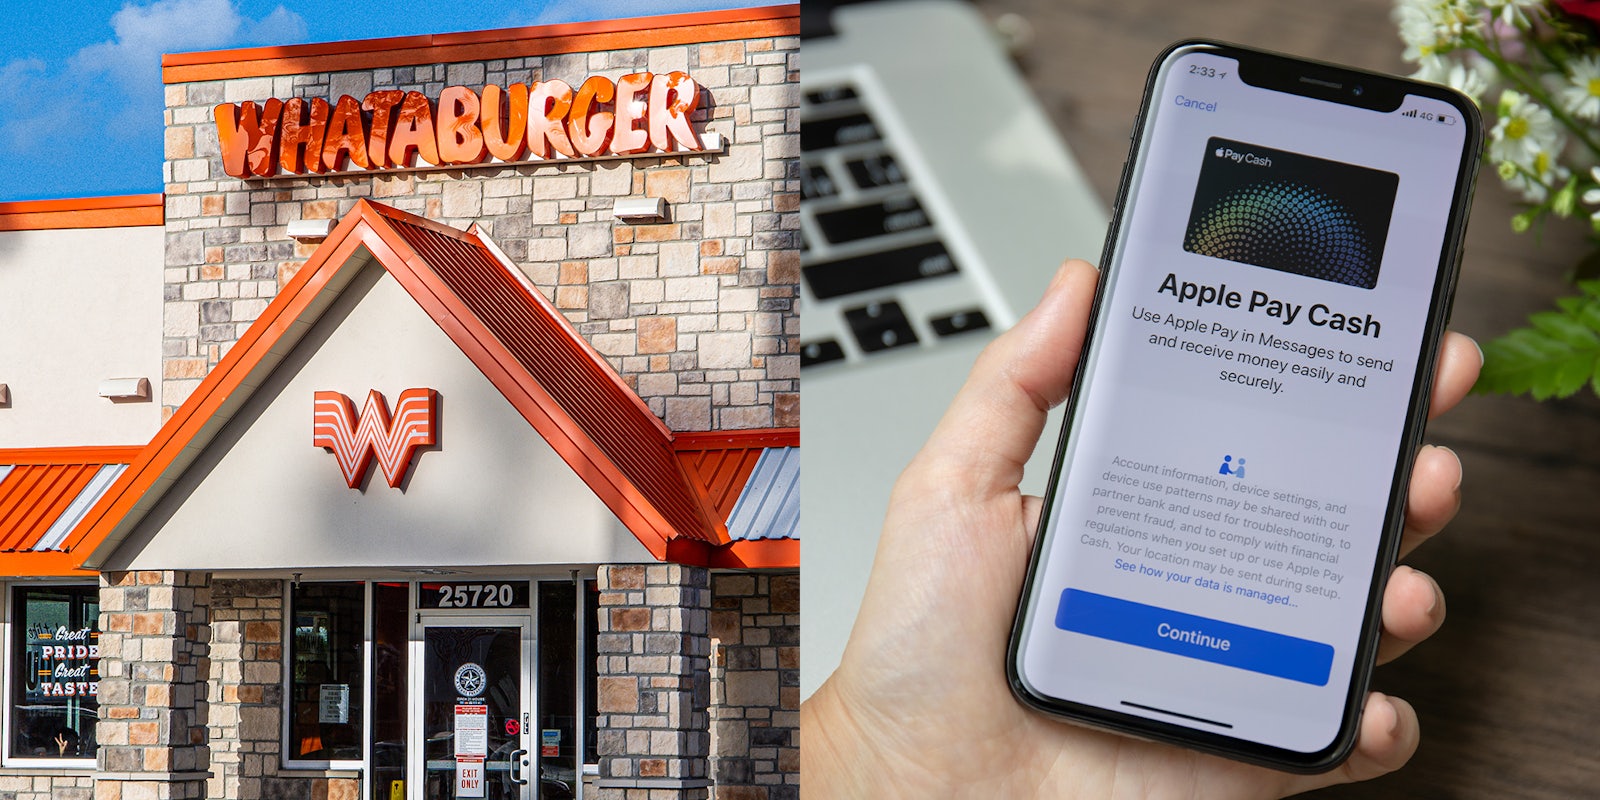 Whataburger Restaurant; Person holding iPhone with Apple Pay